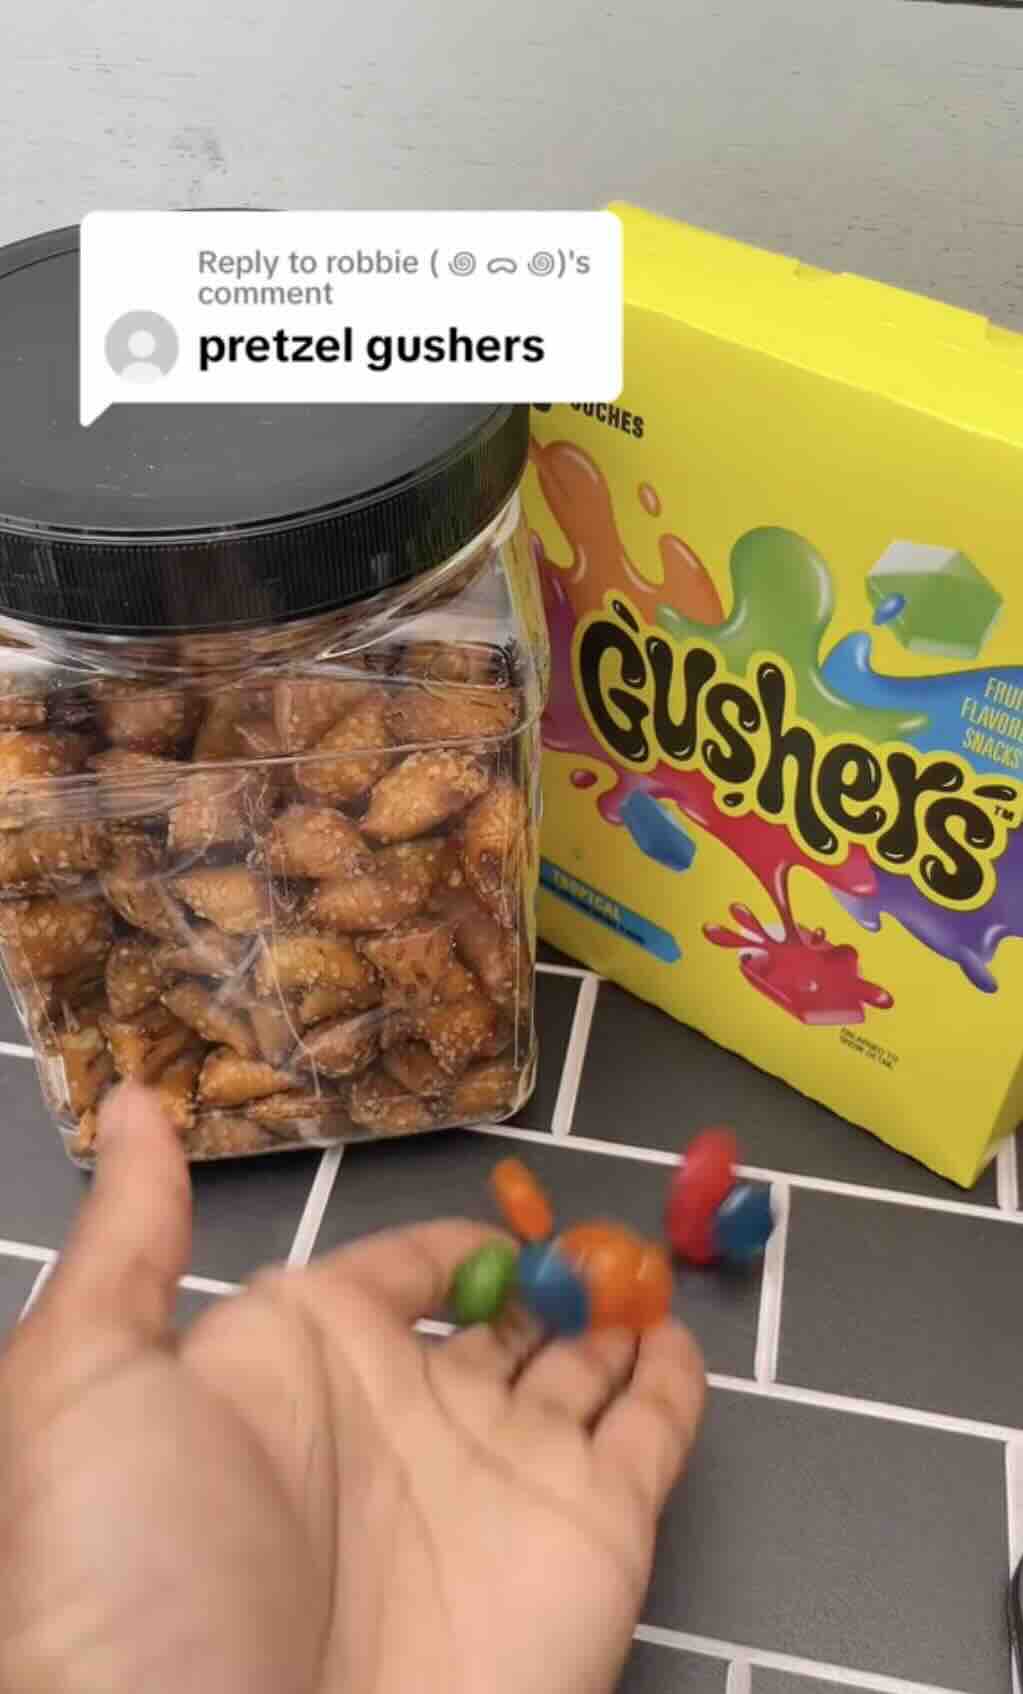 A screenshot of Gusher's TikTok video response to someone requesting pretzels to be eaten with Gushers in the comments of a previous Gusher TikTok video